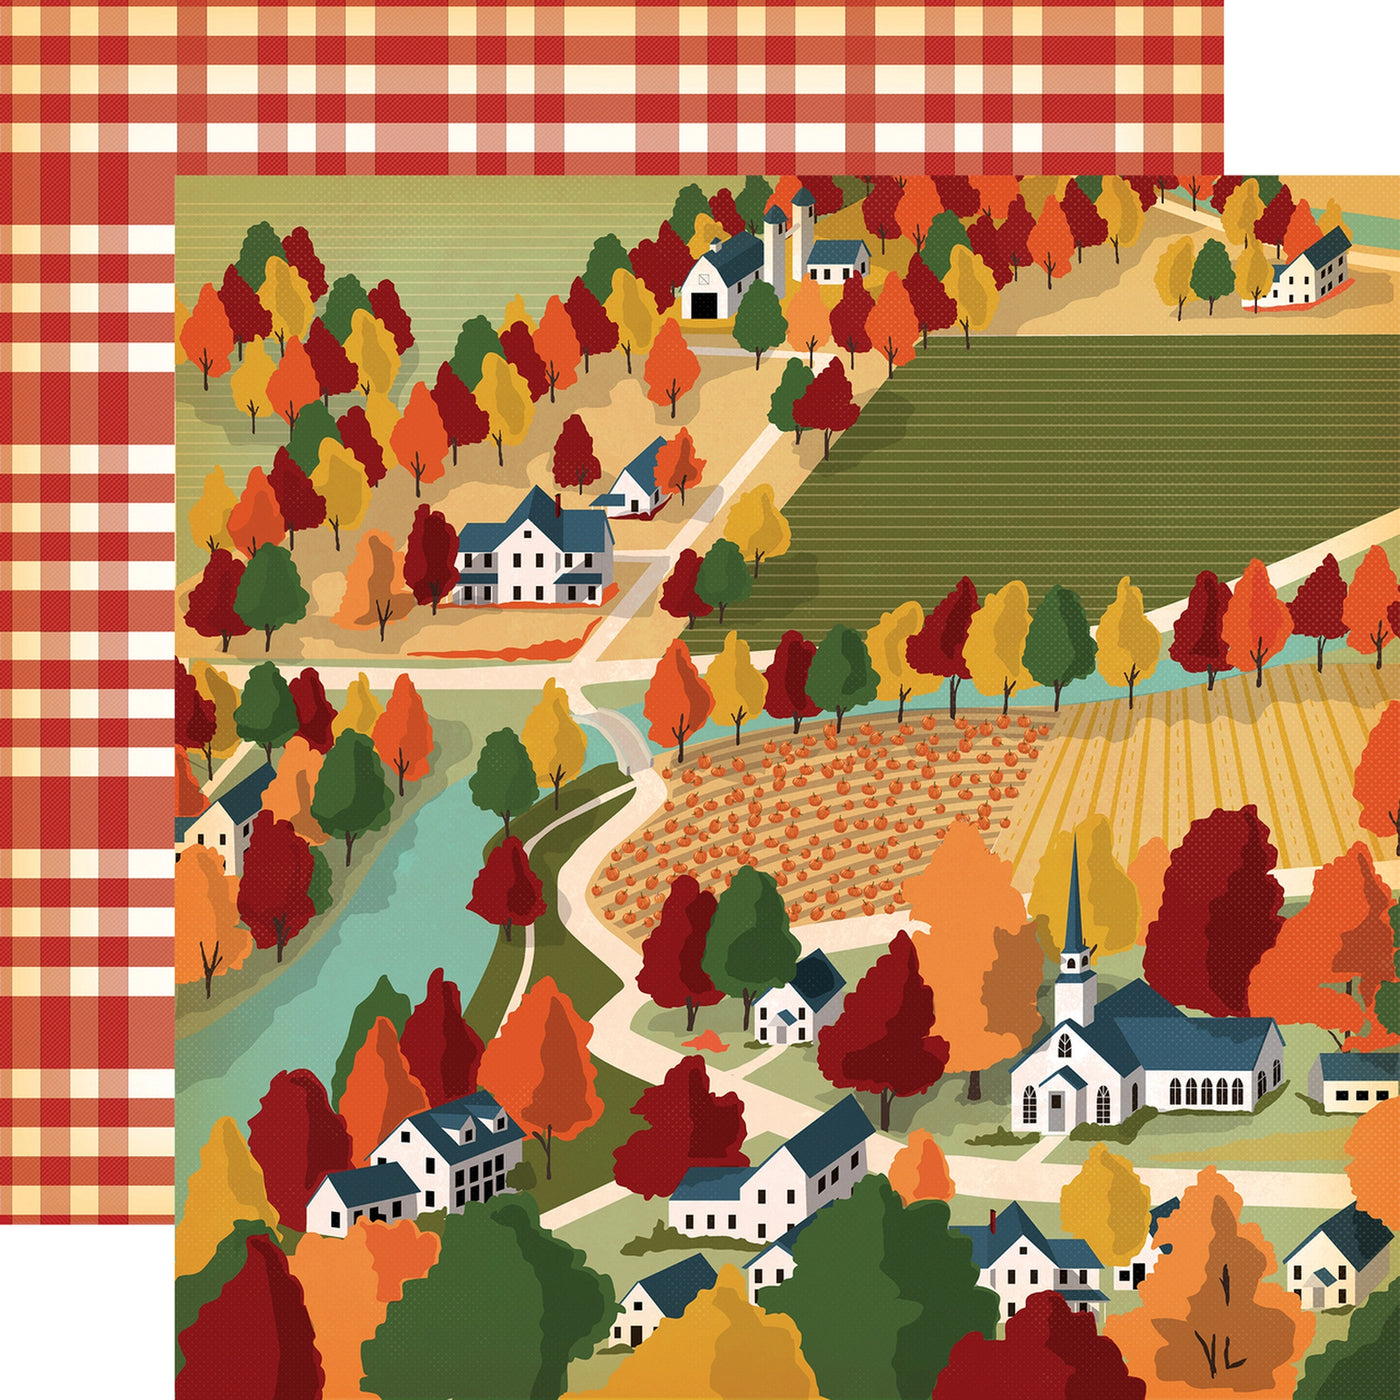 Multi-Colored (Side A - town scenery in fall colors, Side B - brick red plaid)